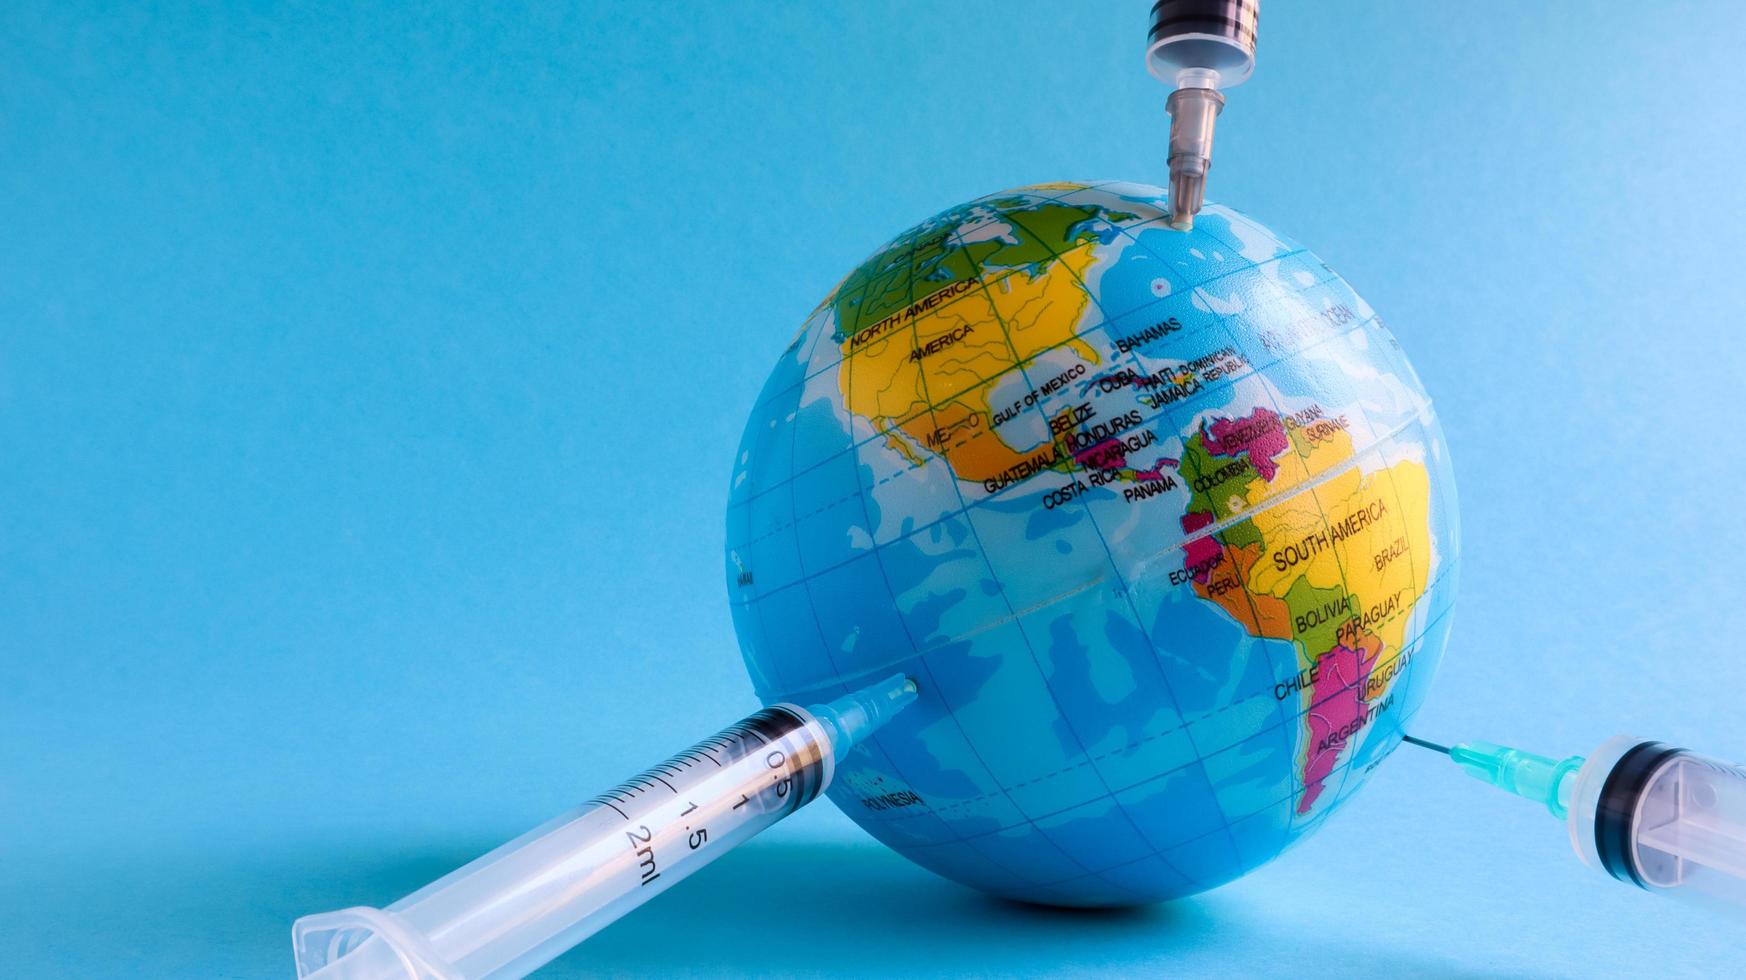 Ukraine, Kiev - April 15, 2020. Globe from the side of America full of syringes. To illustrate the need for a vaccine to fight the global pandemic in the United States caused by the Covid-19 virus. photo